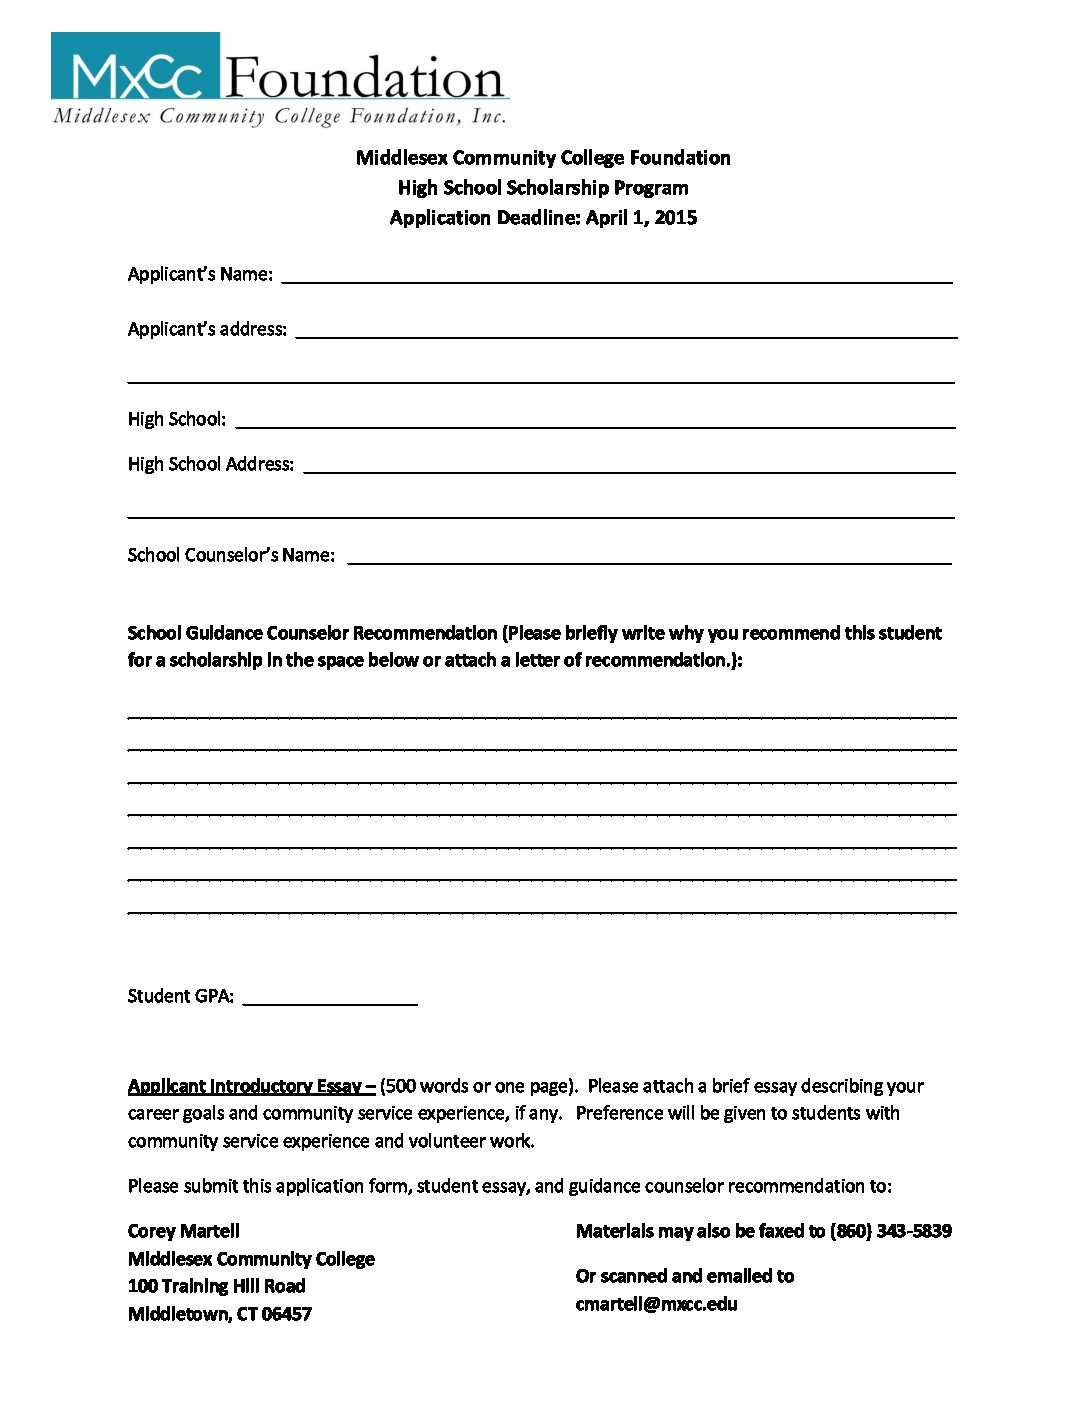 High School Scholarship Application 2015 | CT State, Middlesex